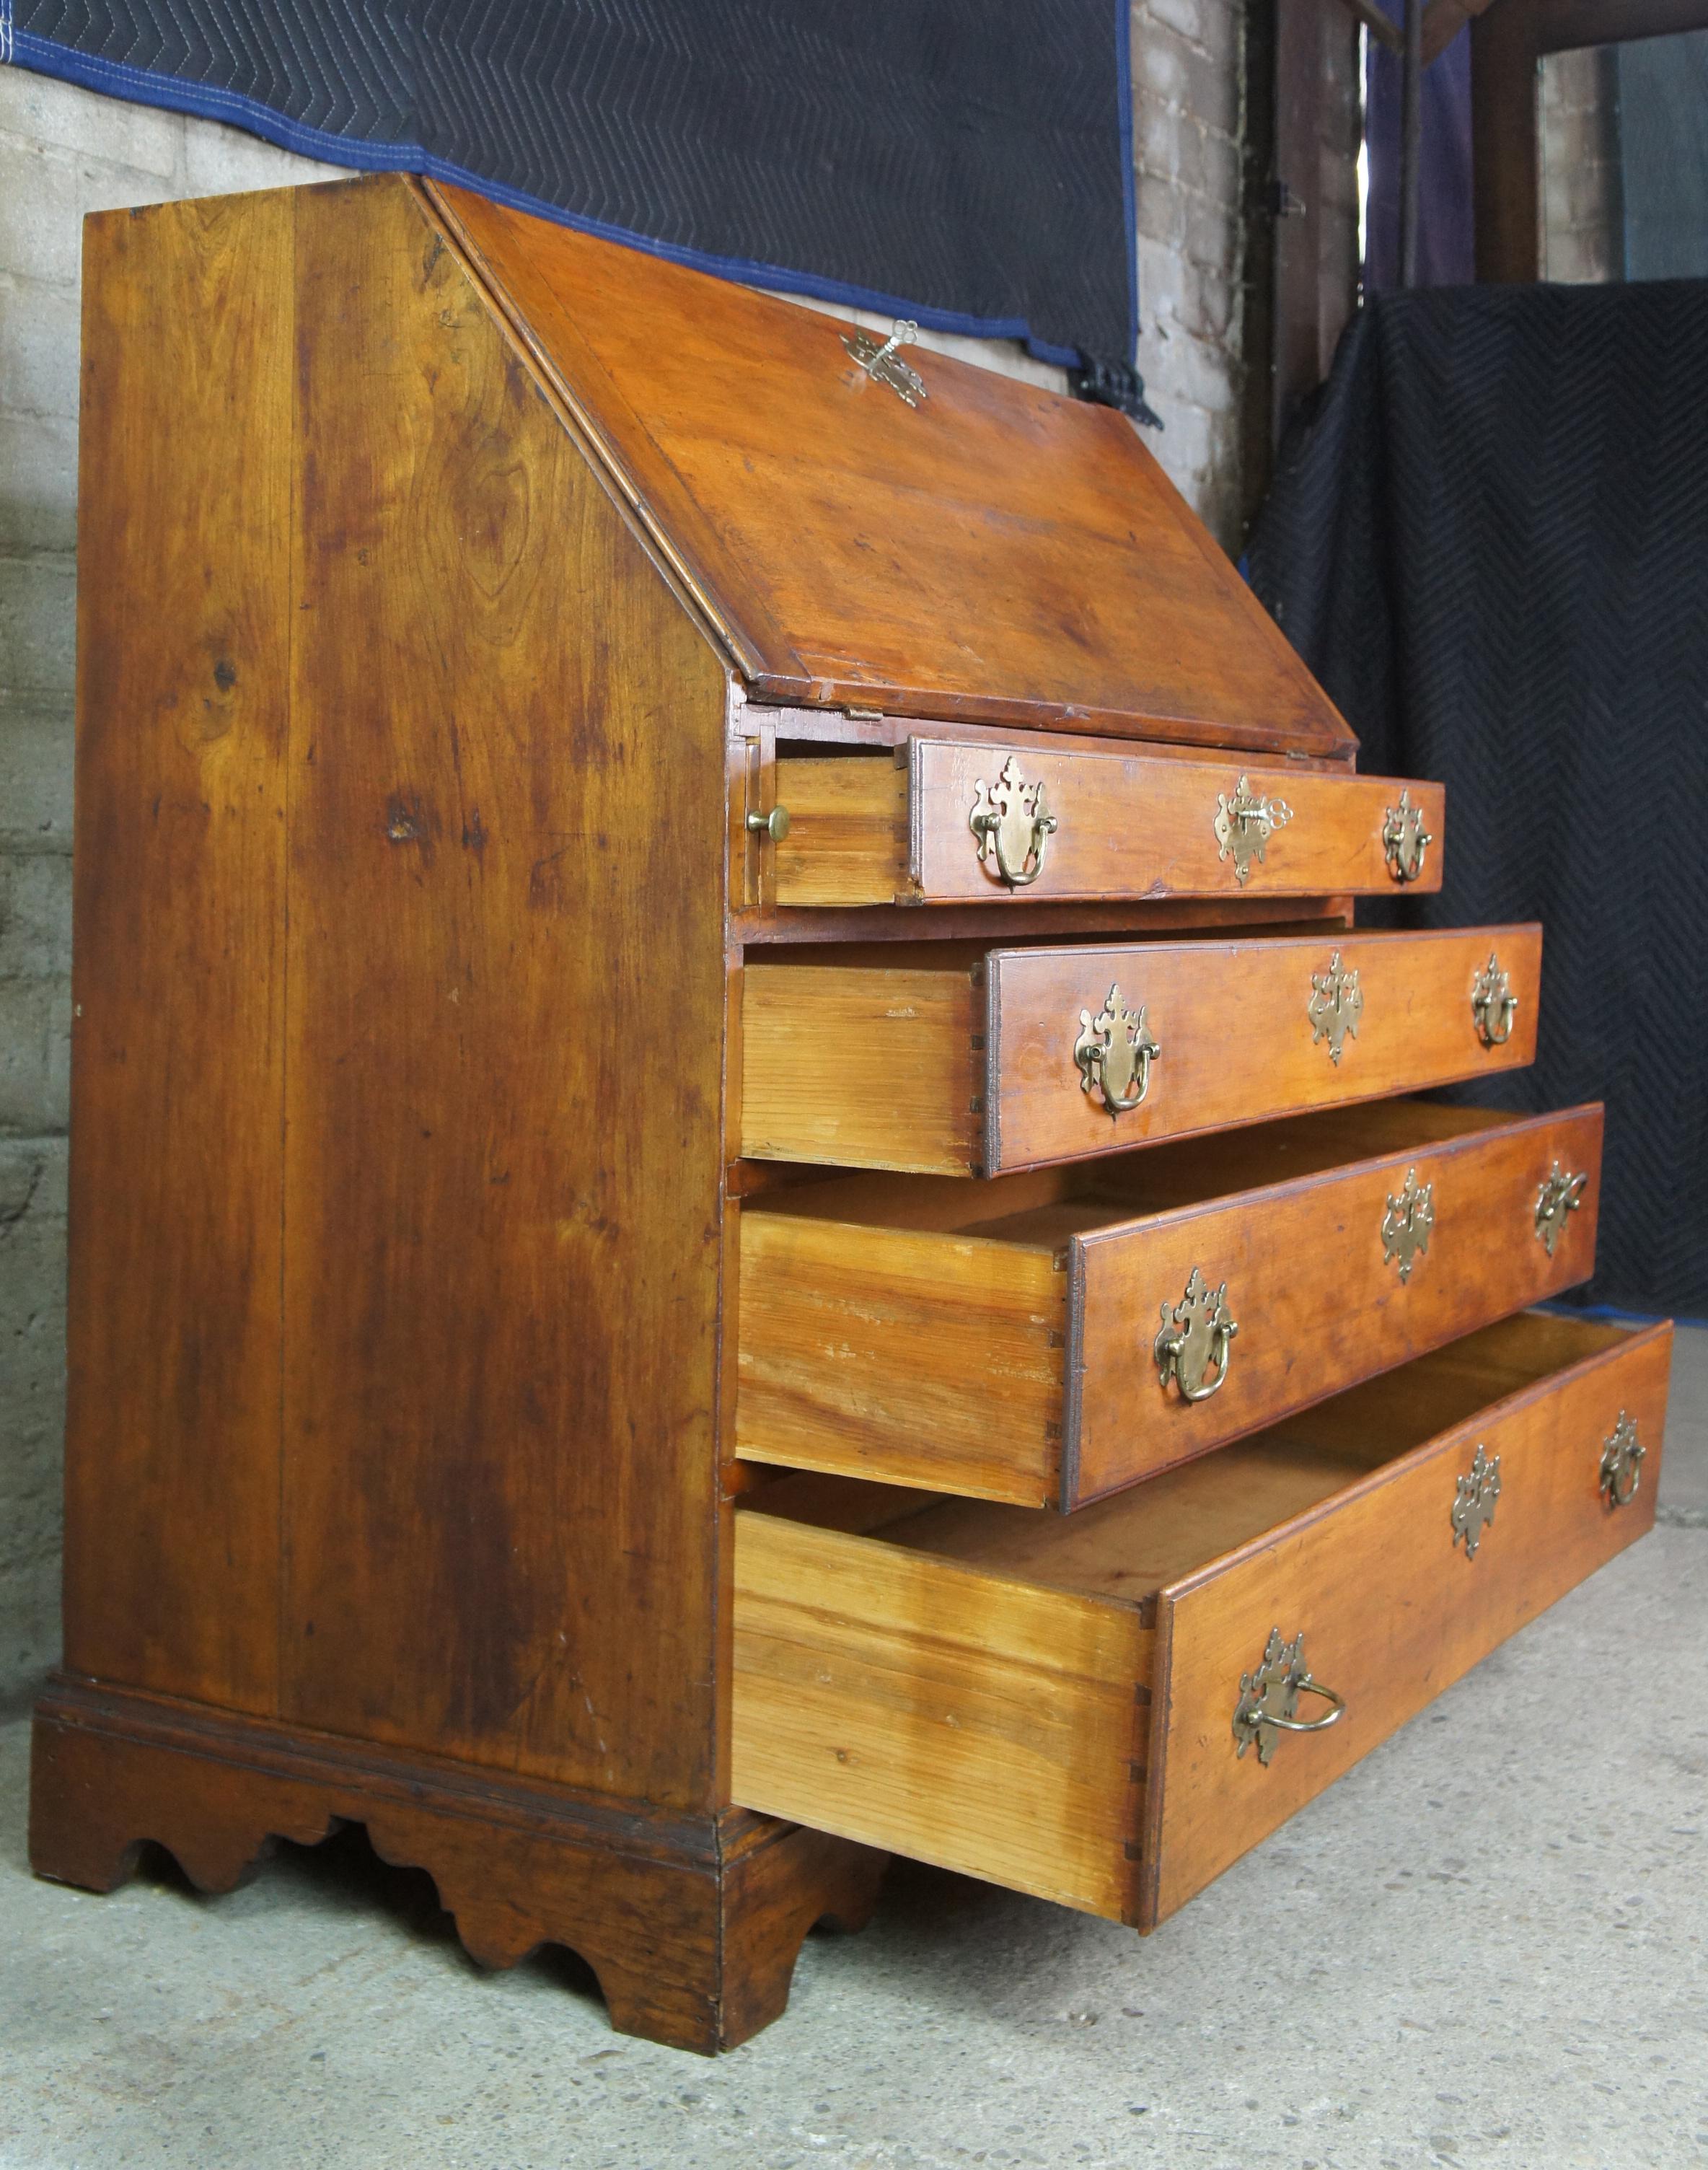 Antique 18th Century American Chippendale Maple Secretary Desk Writing Bureau In Good Condition For Sale In Dayton, OH